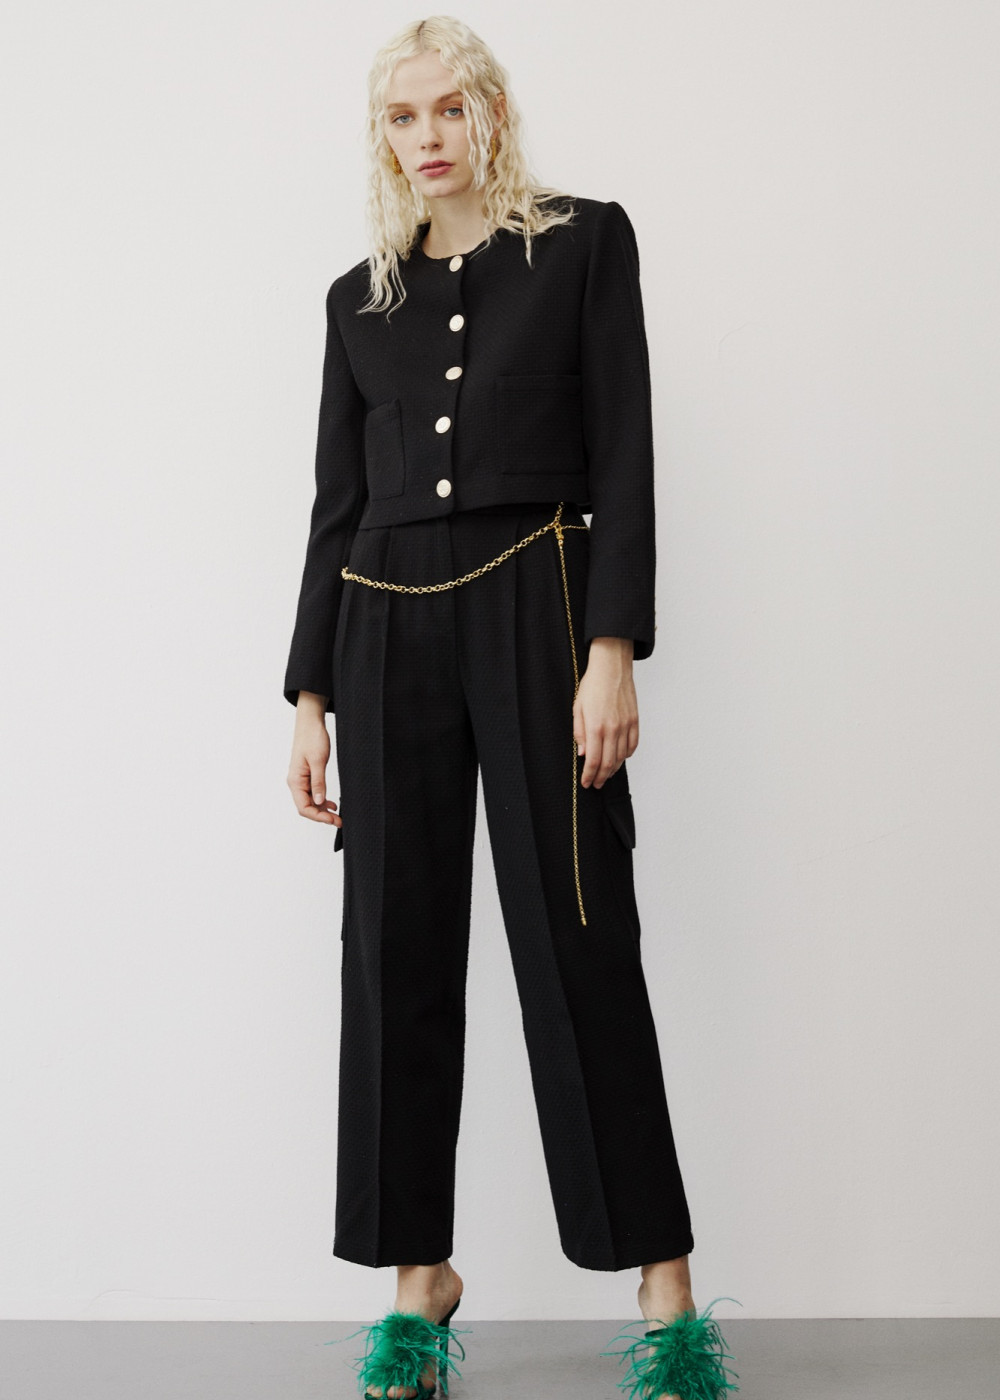 Chanel Crop Jacket - Chanel Cargo Trousers